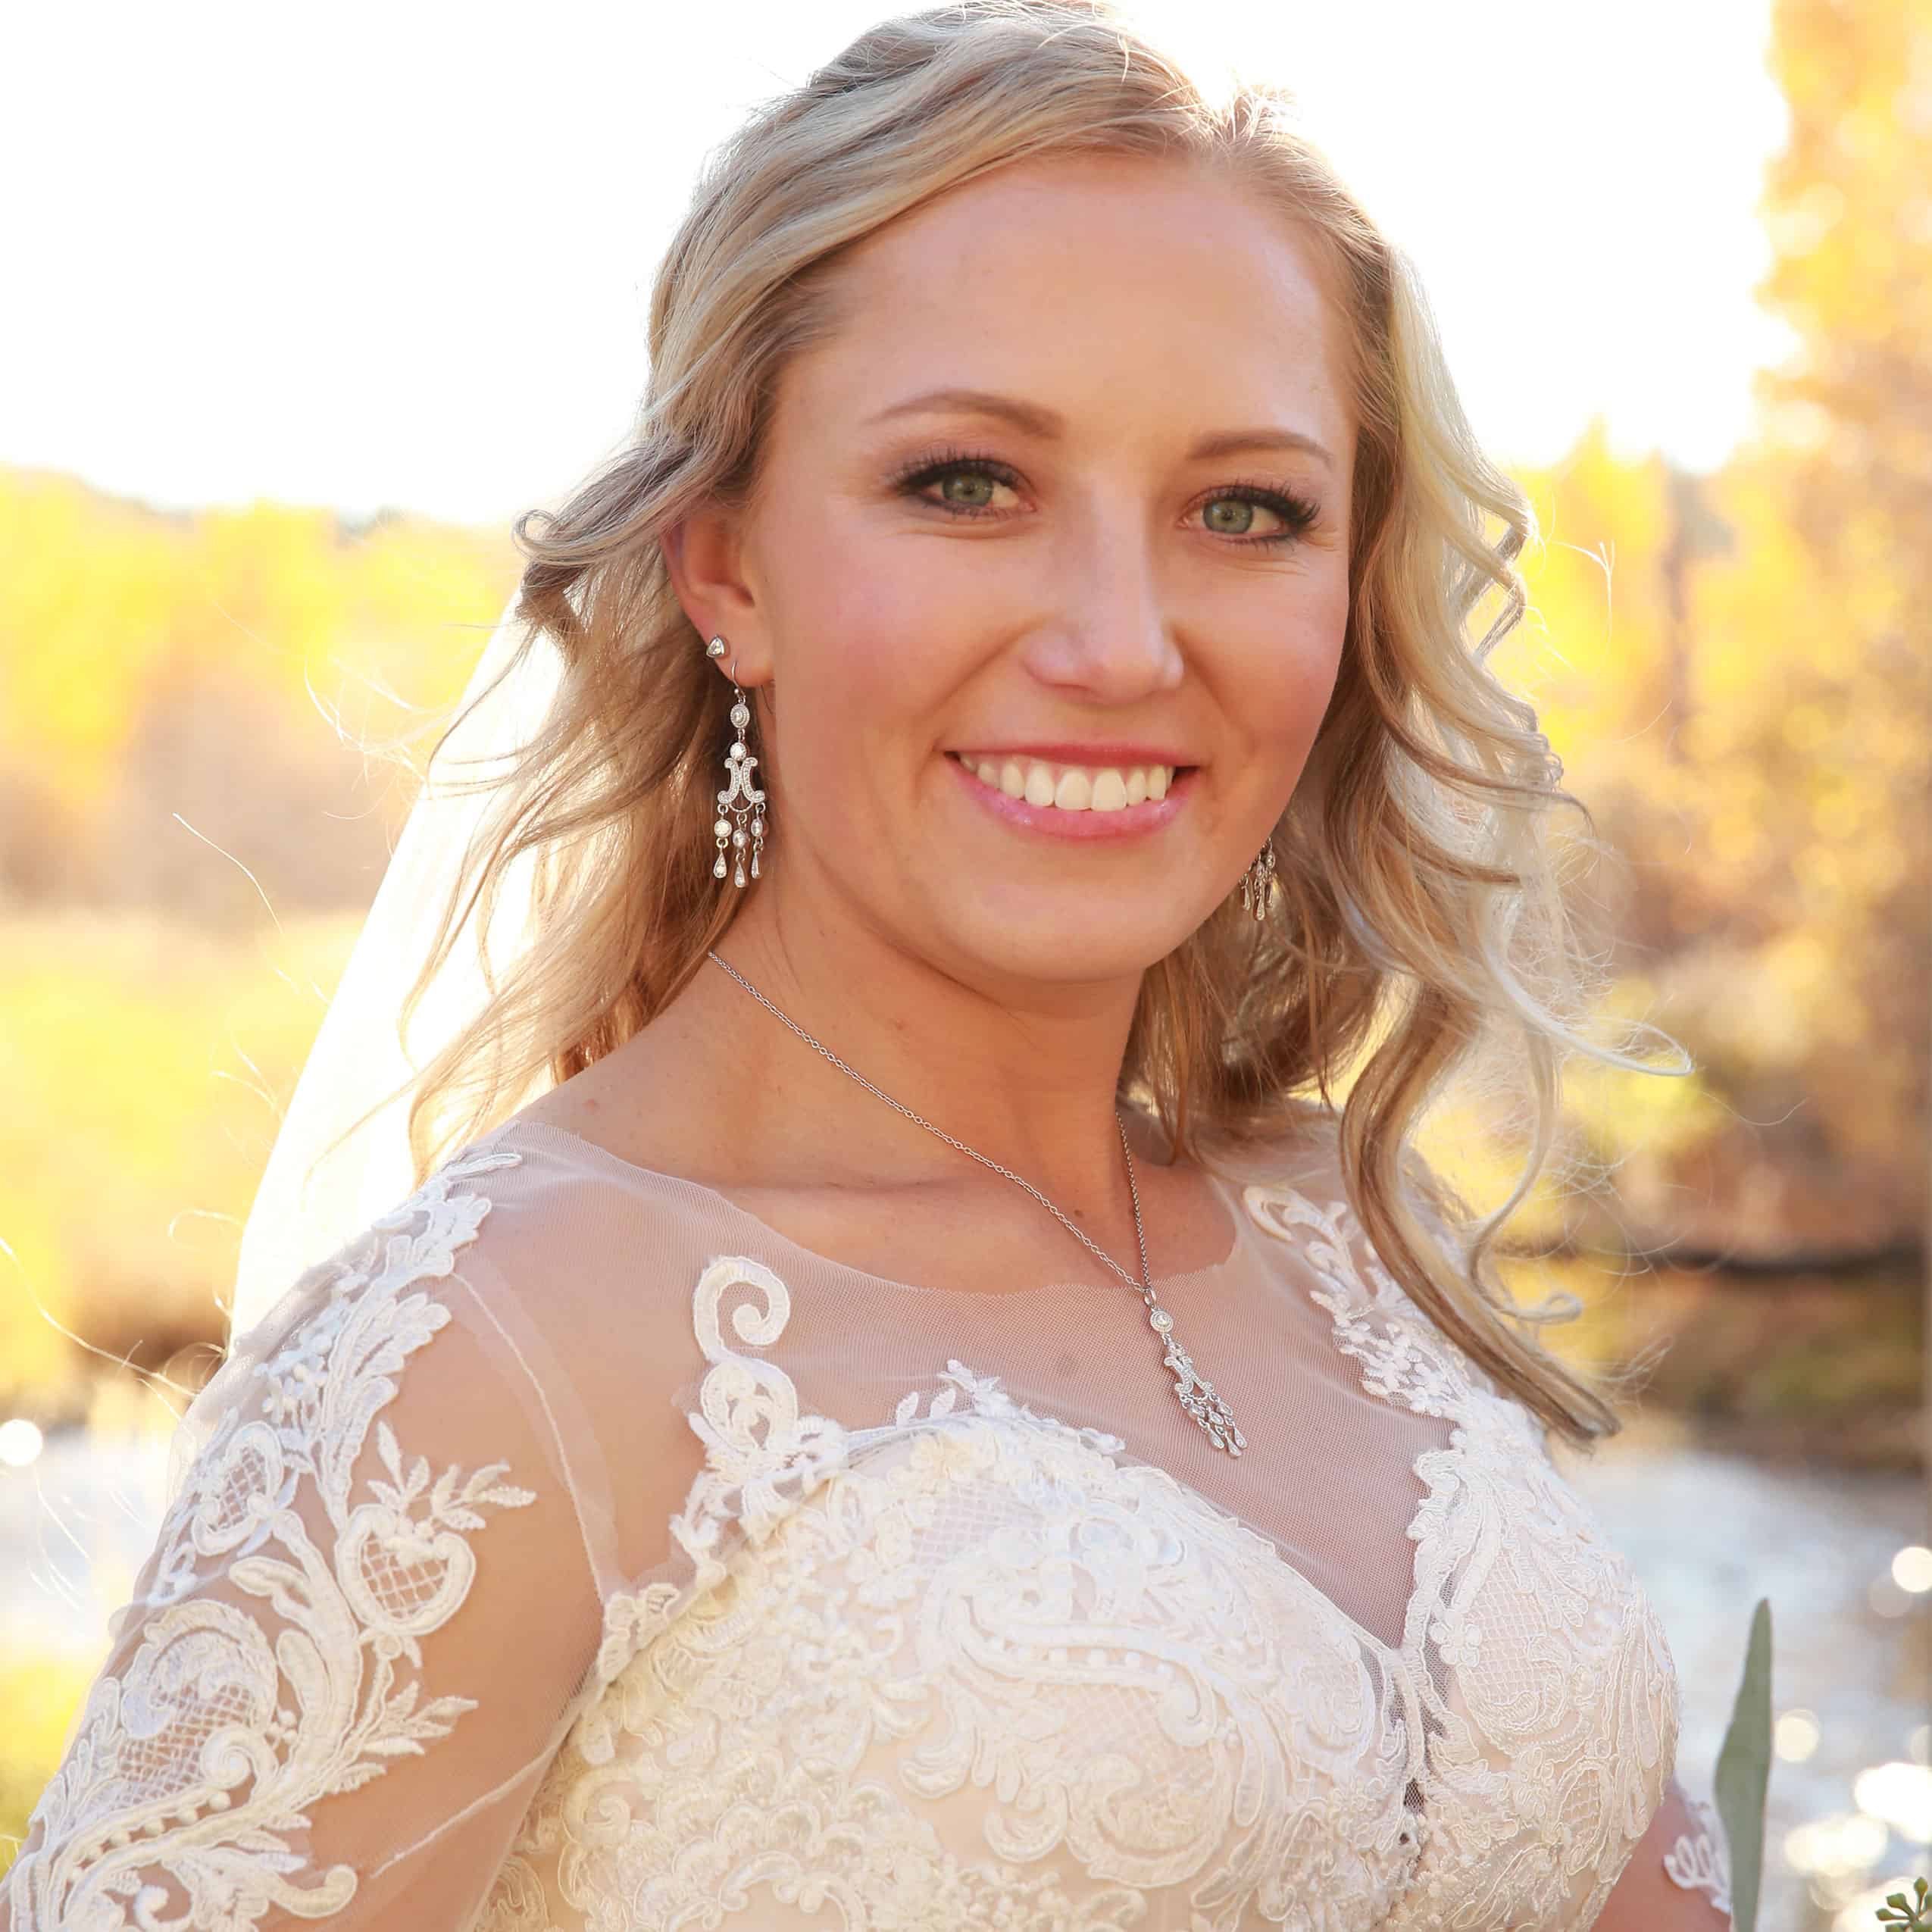 Montana Silversmiths necklace and earrings on a bride on her wedding day